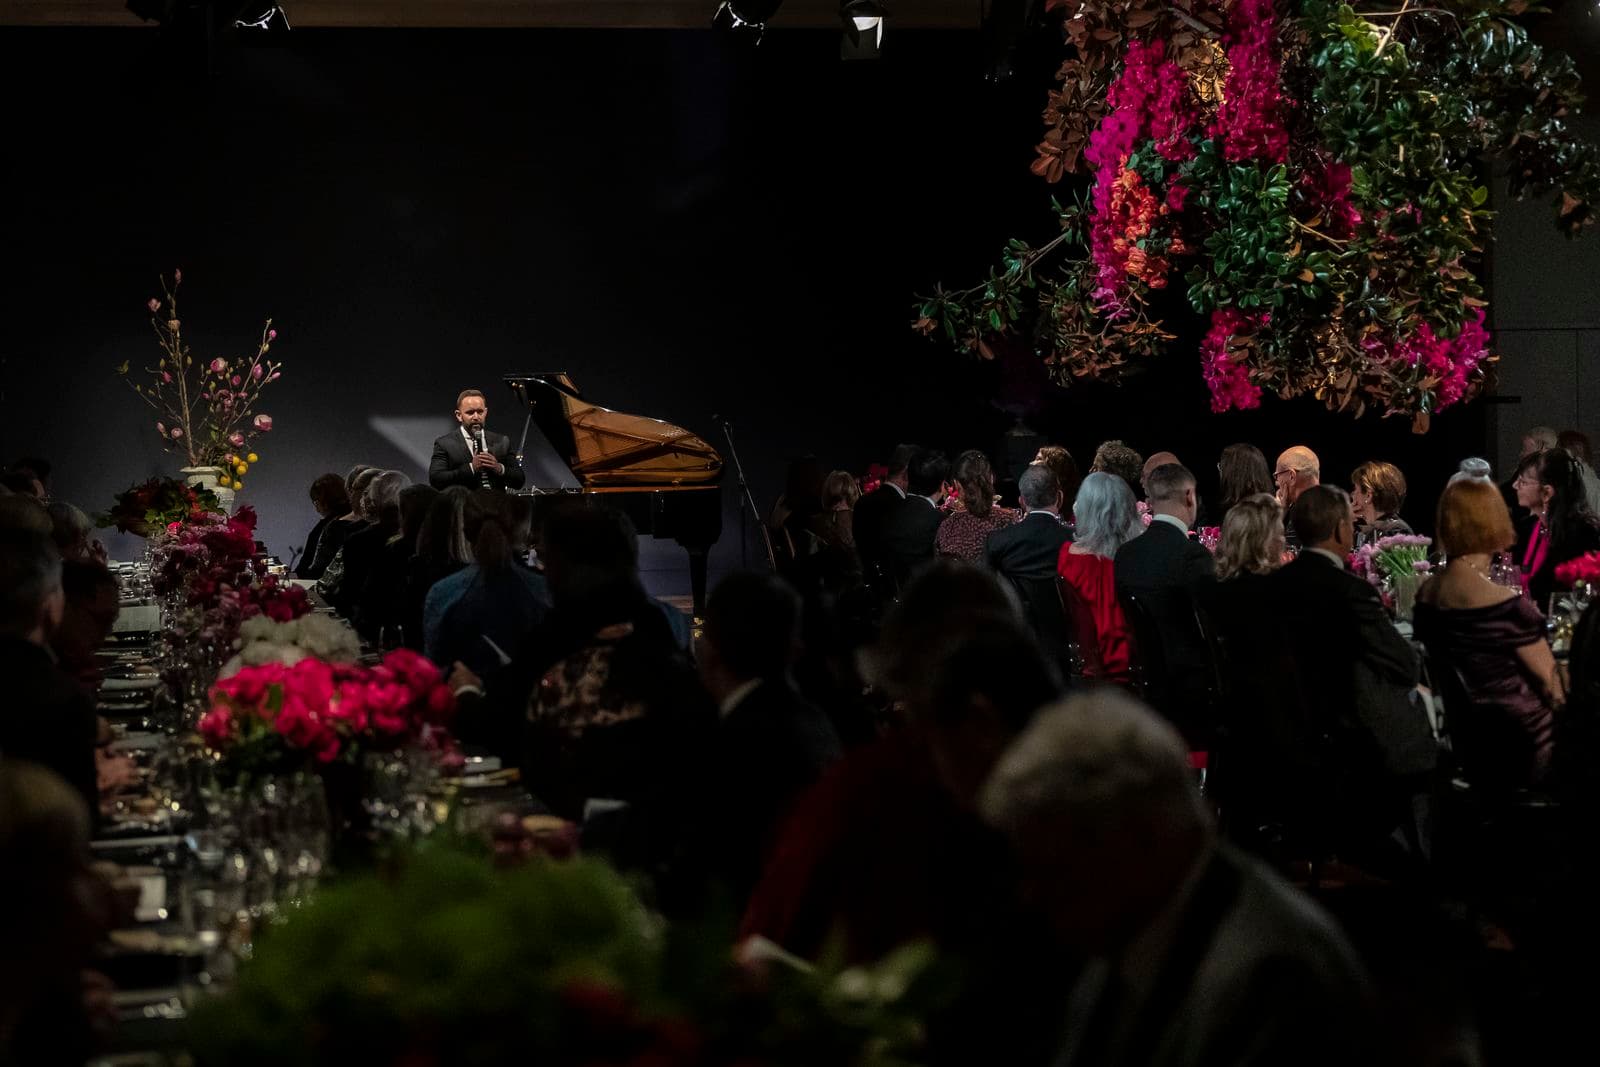 Photograph of gala dinner with guests seated amongst flowers and speaker in distance